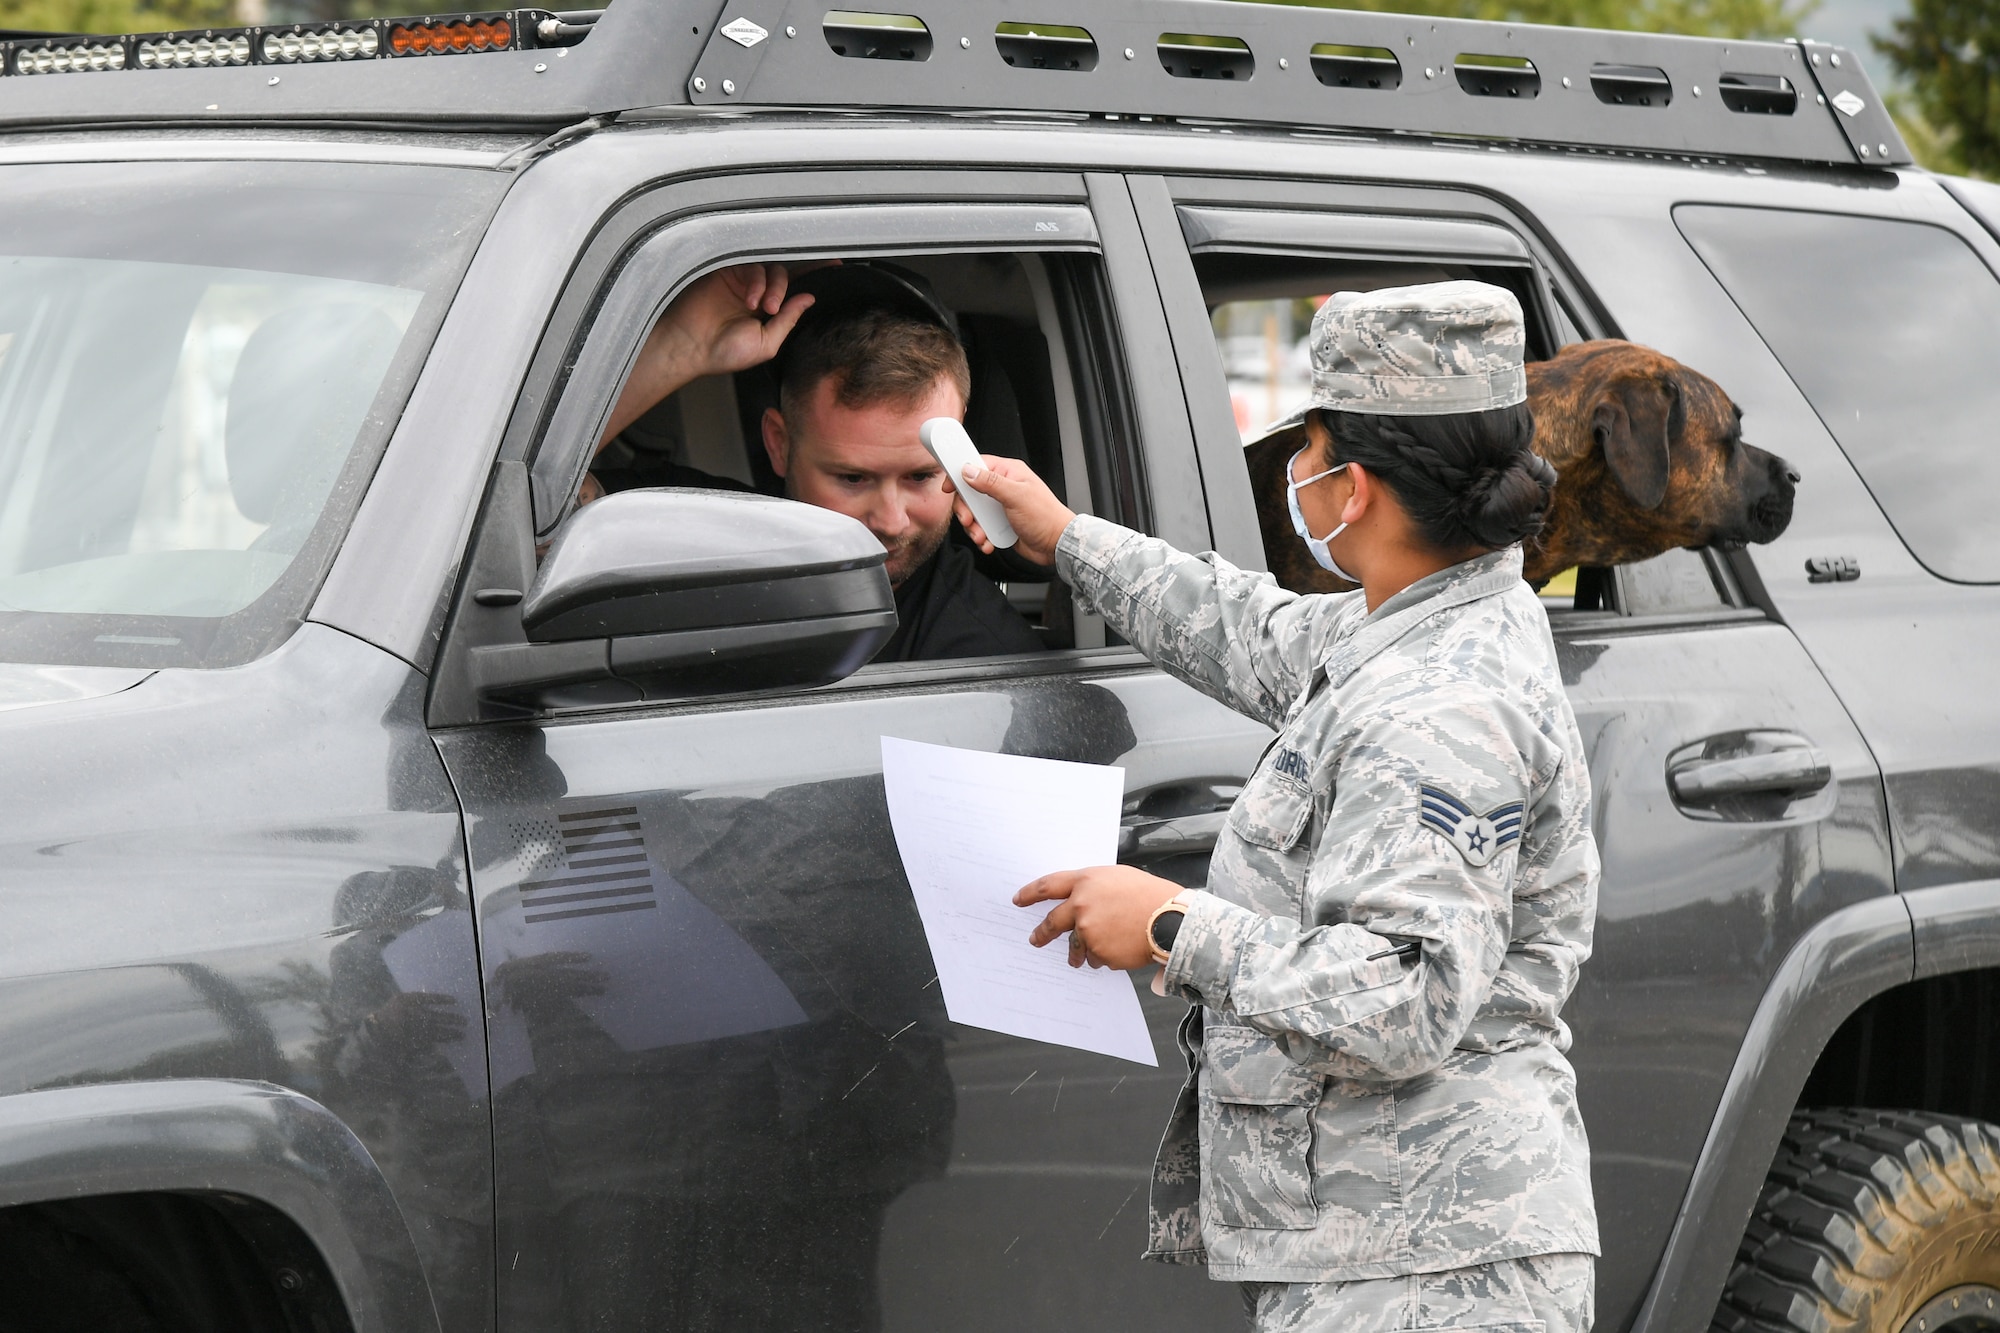 Tech. Sgt. Charles Fulland, 421st Fighter Squadron, has his temperature checked by Senior Airman Jazmine Brunner, 75th Medical Group, during a medical screening.